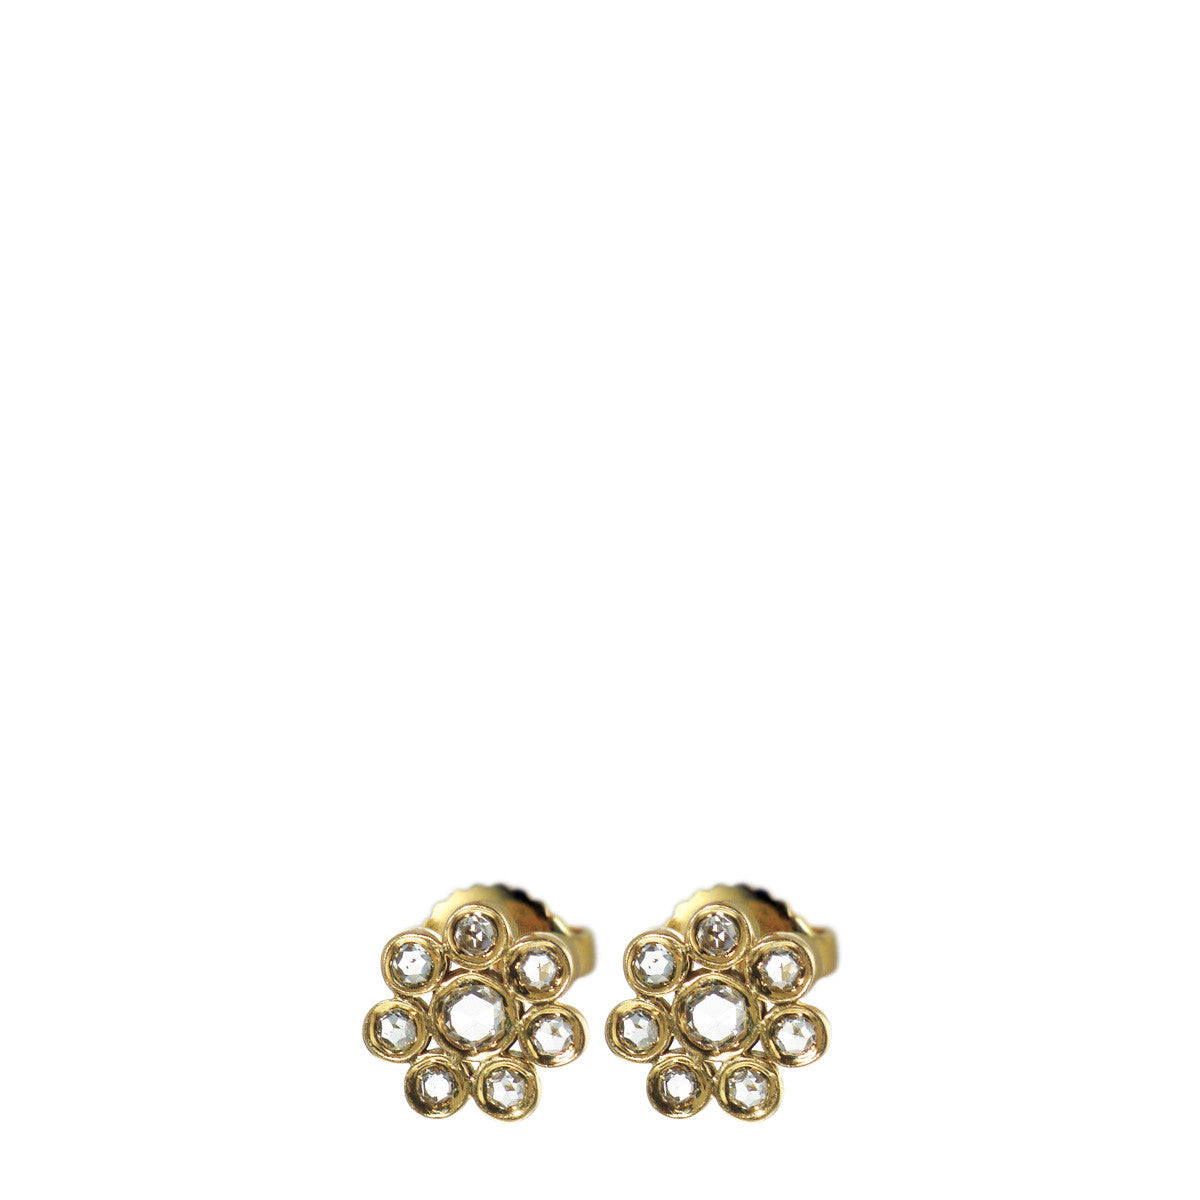 Aggregate 141+ small gold stud earrings india latest